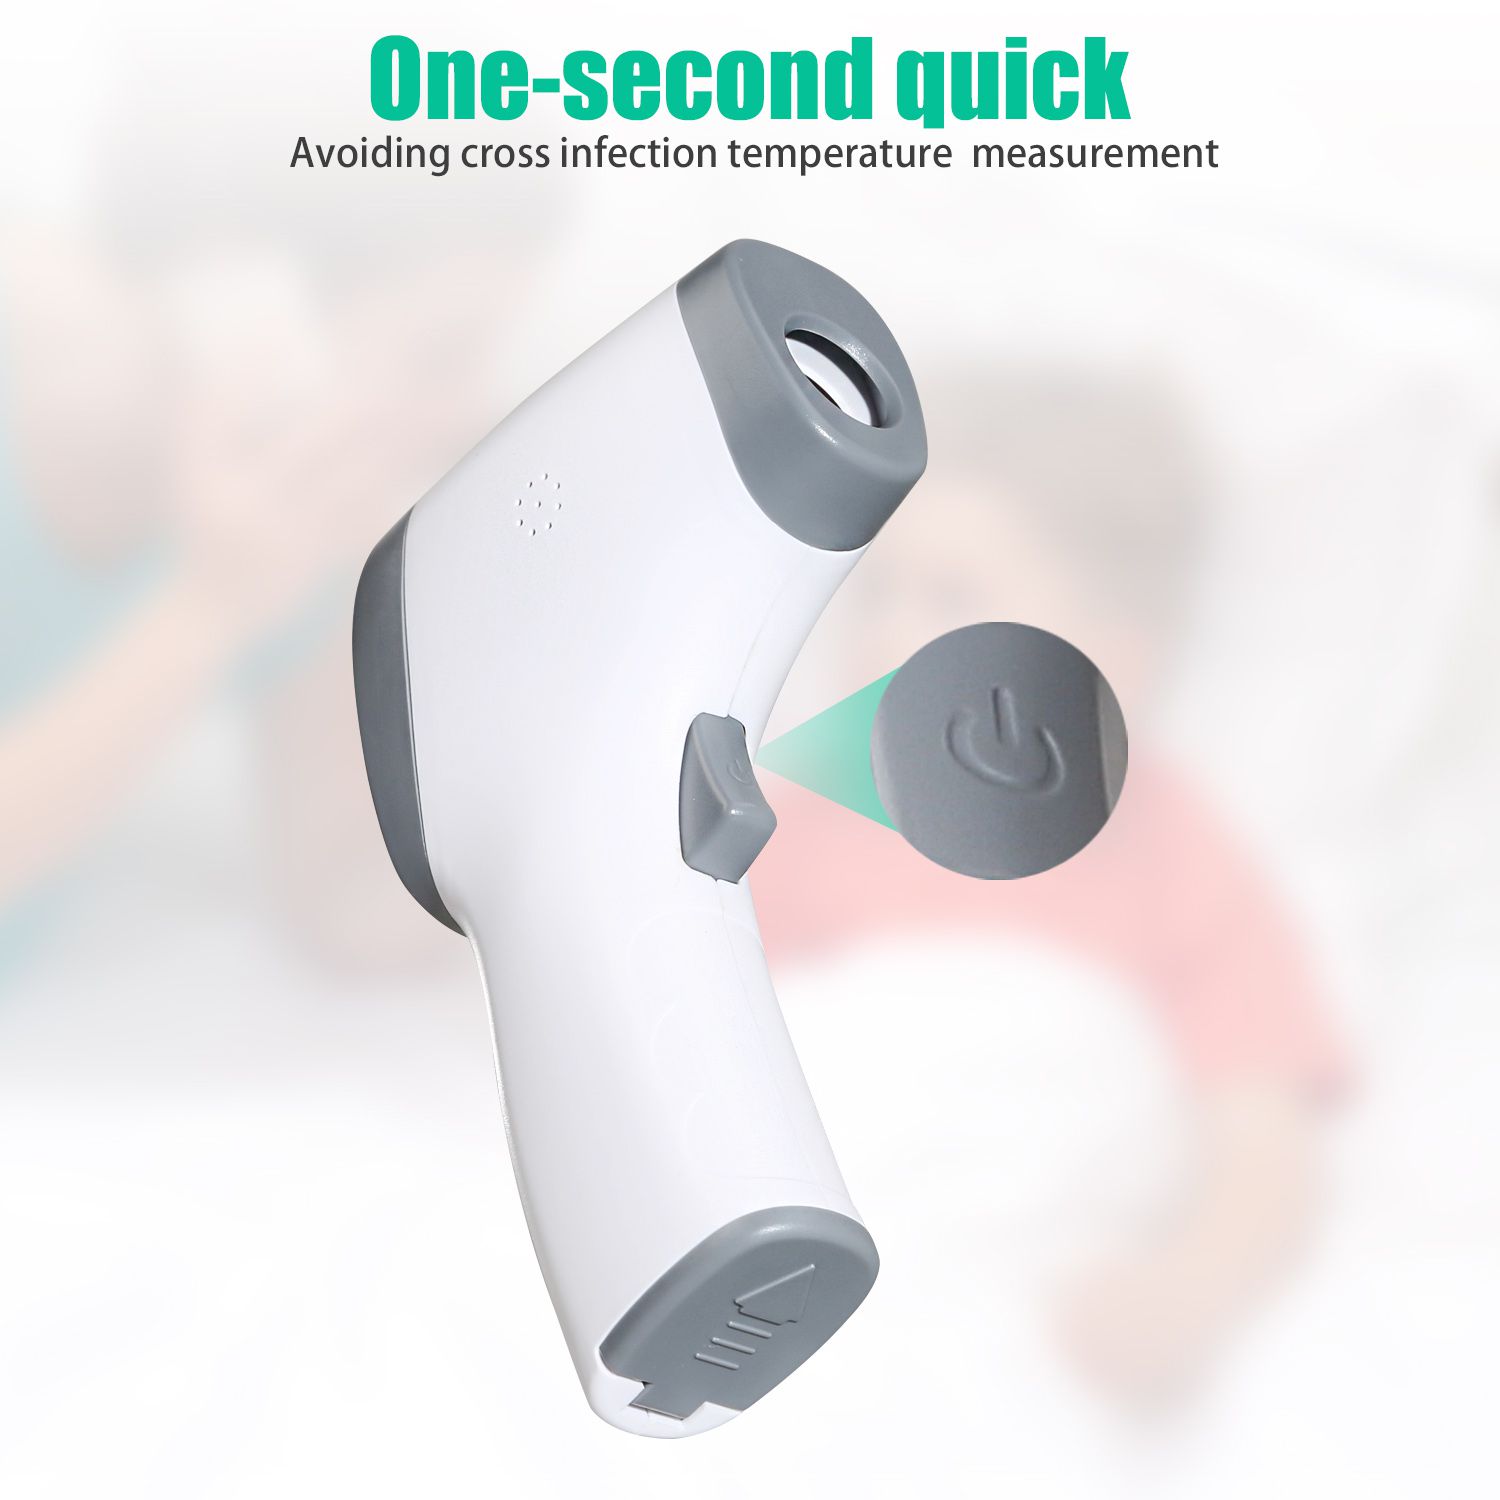 Infrared Thermometer Medical Grade ±0.2℃ Super-Precison Baby Adult Forehead Non-contact LCD IR Temperature Measurement